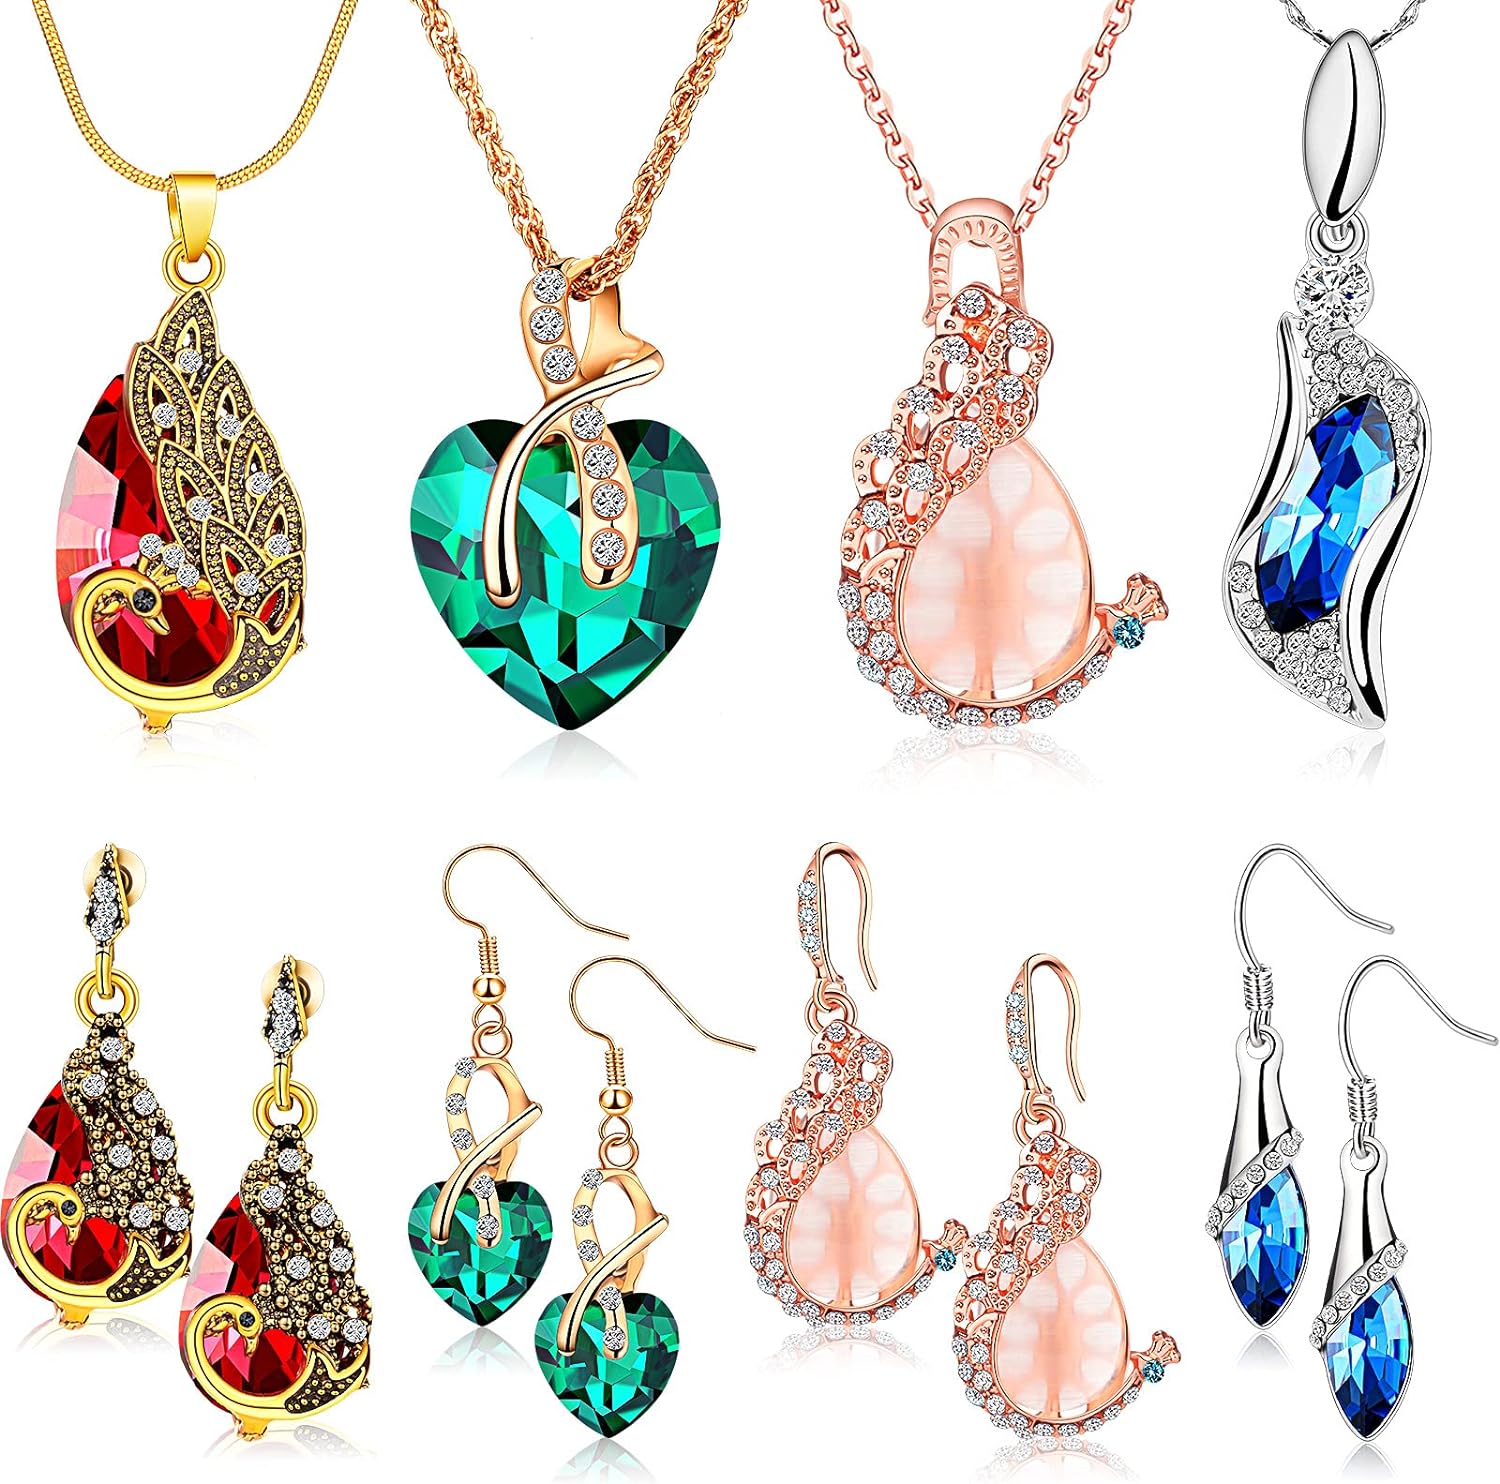 MTLEE 4 Sets Peacock Jewelry for Women, Valentines Day Gifts Crystal Necklace Earrings, Rhinestone Waterdrop Pendant, Heart Charm Hook Earrings for Birthday Party Gifts